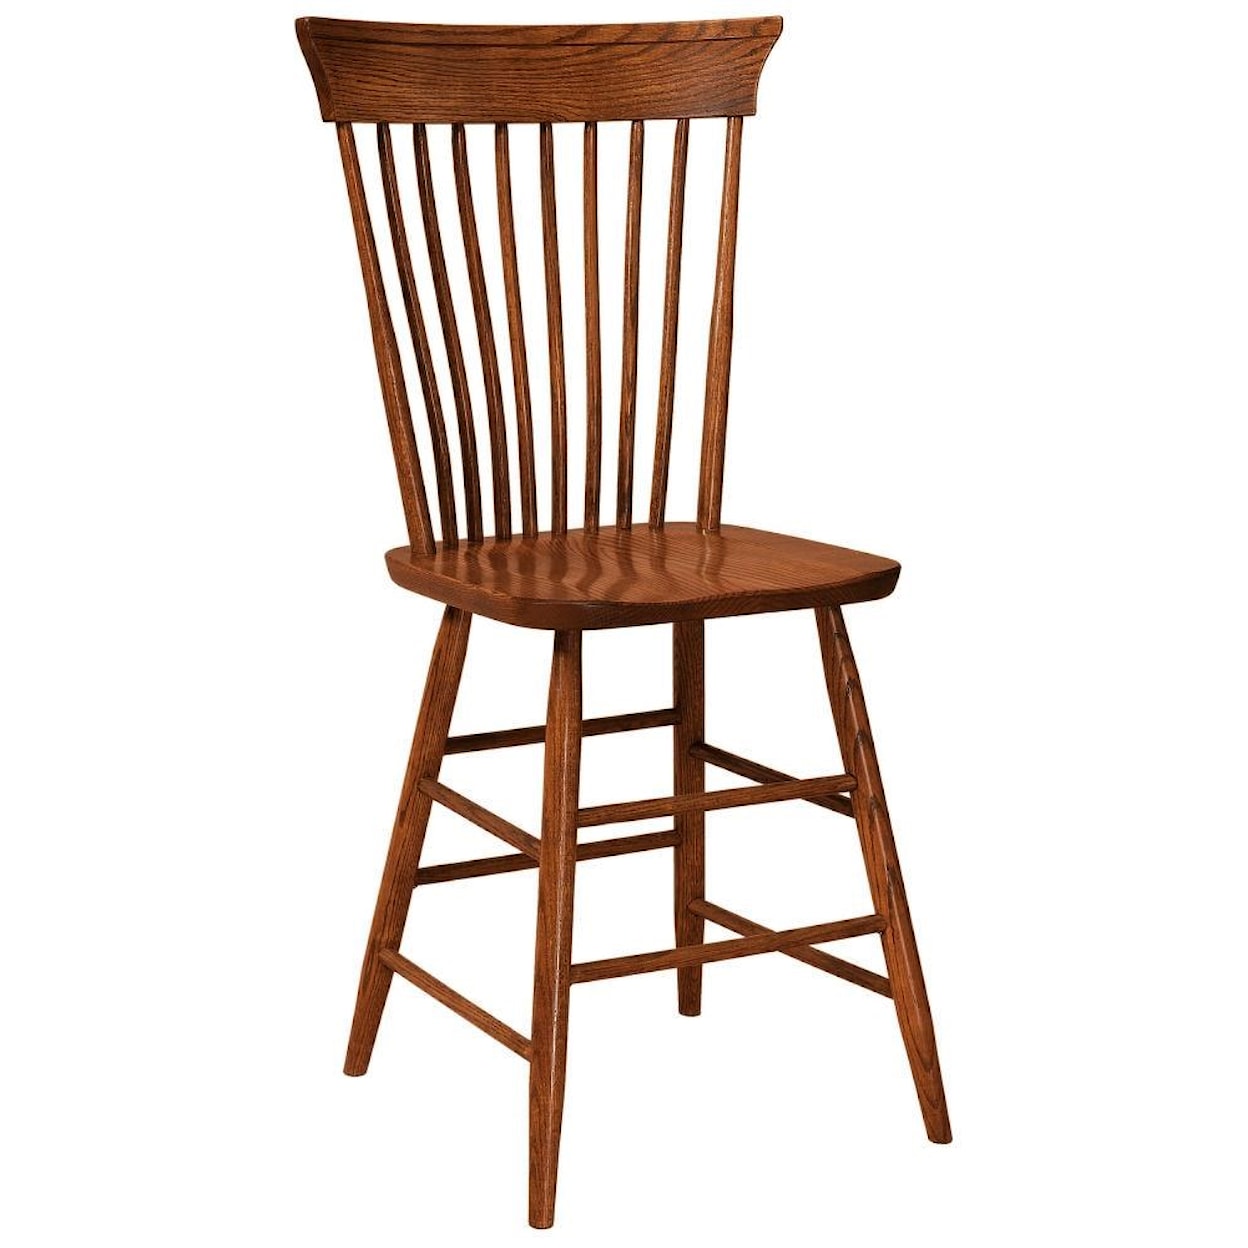 F&N Woodworking Concord 30" Stationary Stool